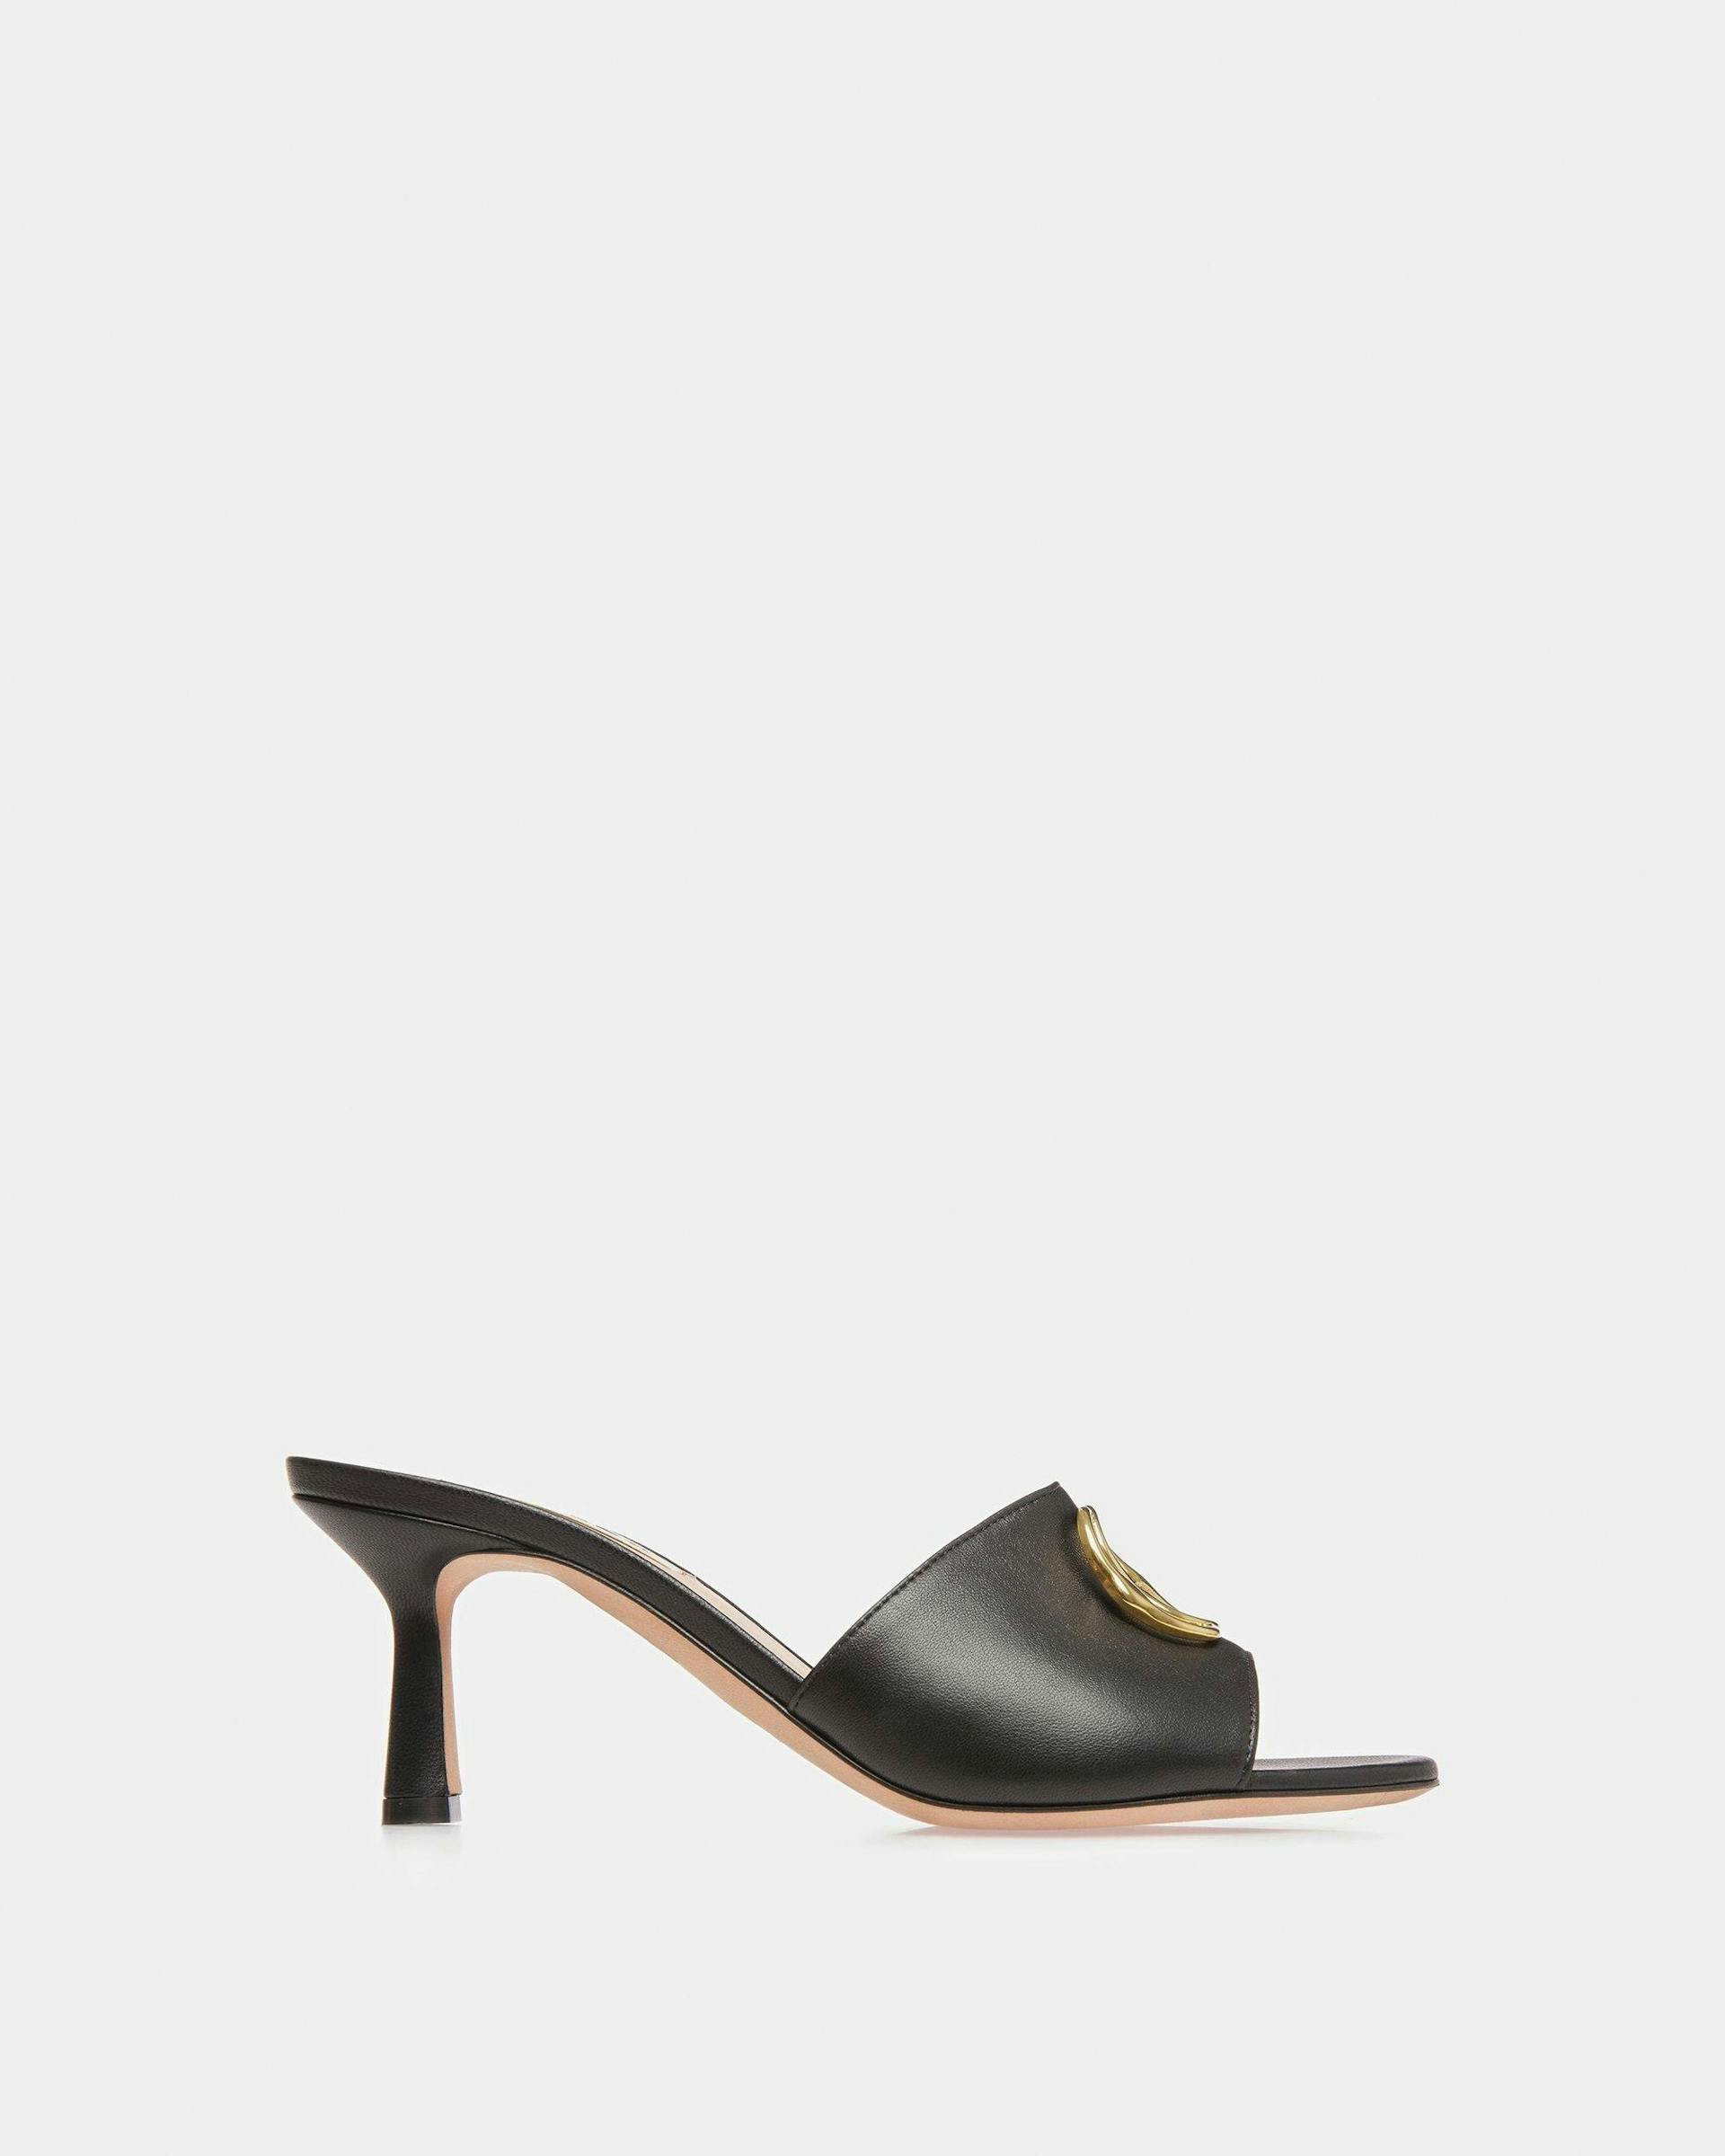 Emblem Sandals In Black Leather - Women's - Bally - 01